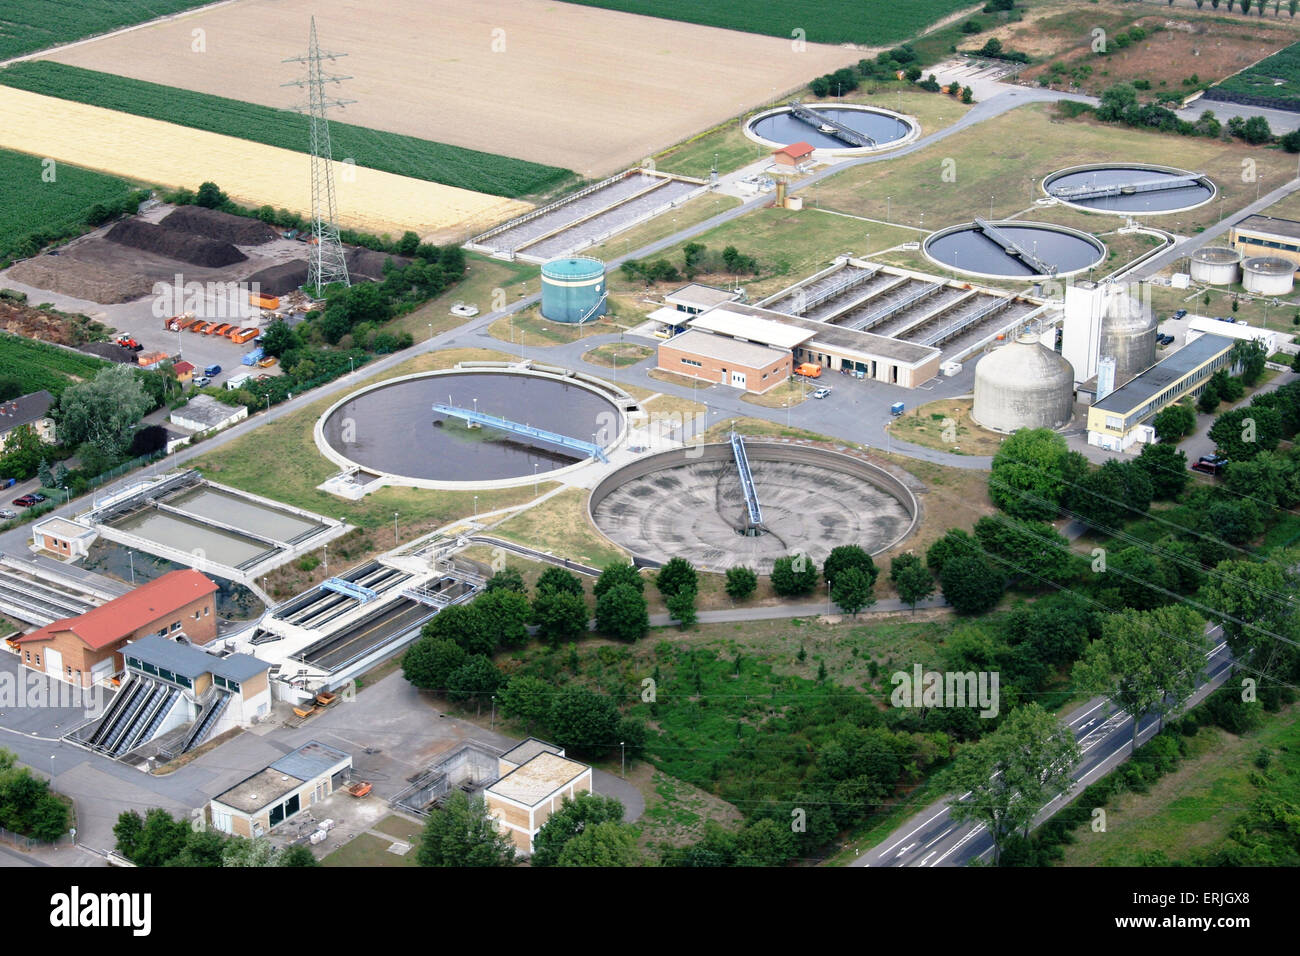 Sewage treatment plant from above Stock Photo